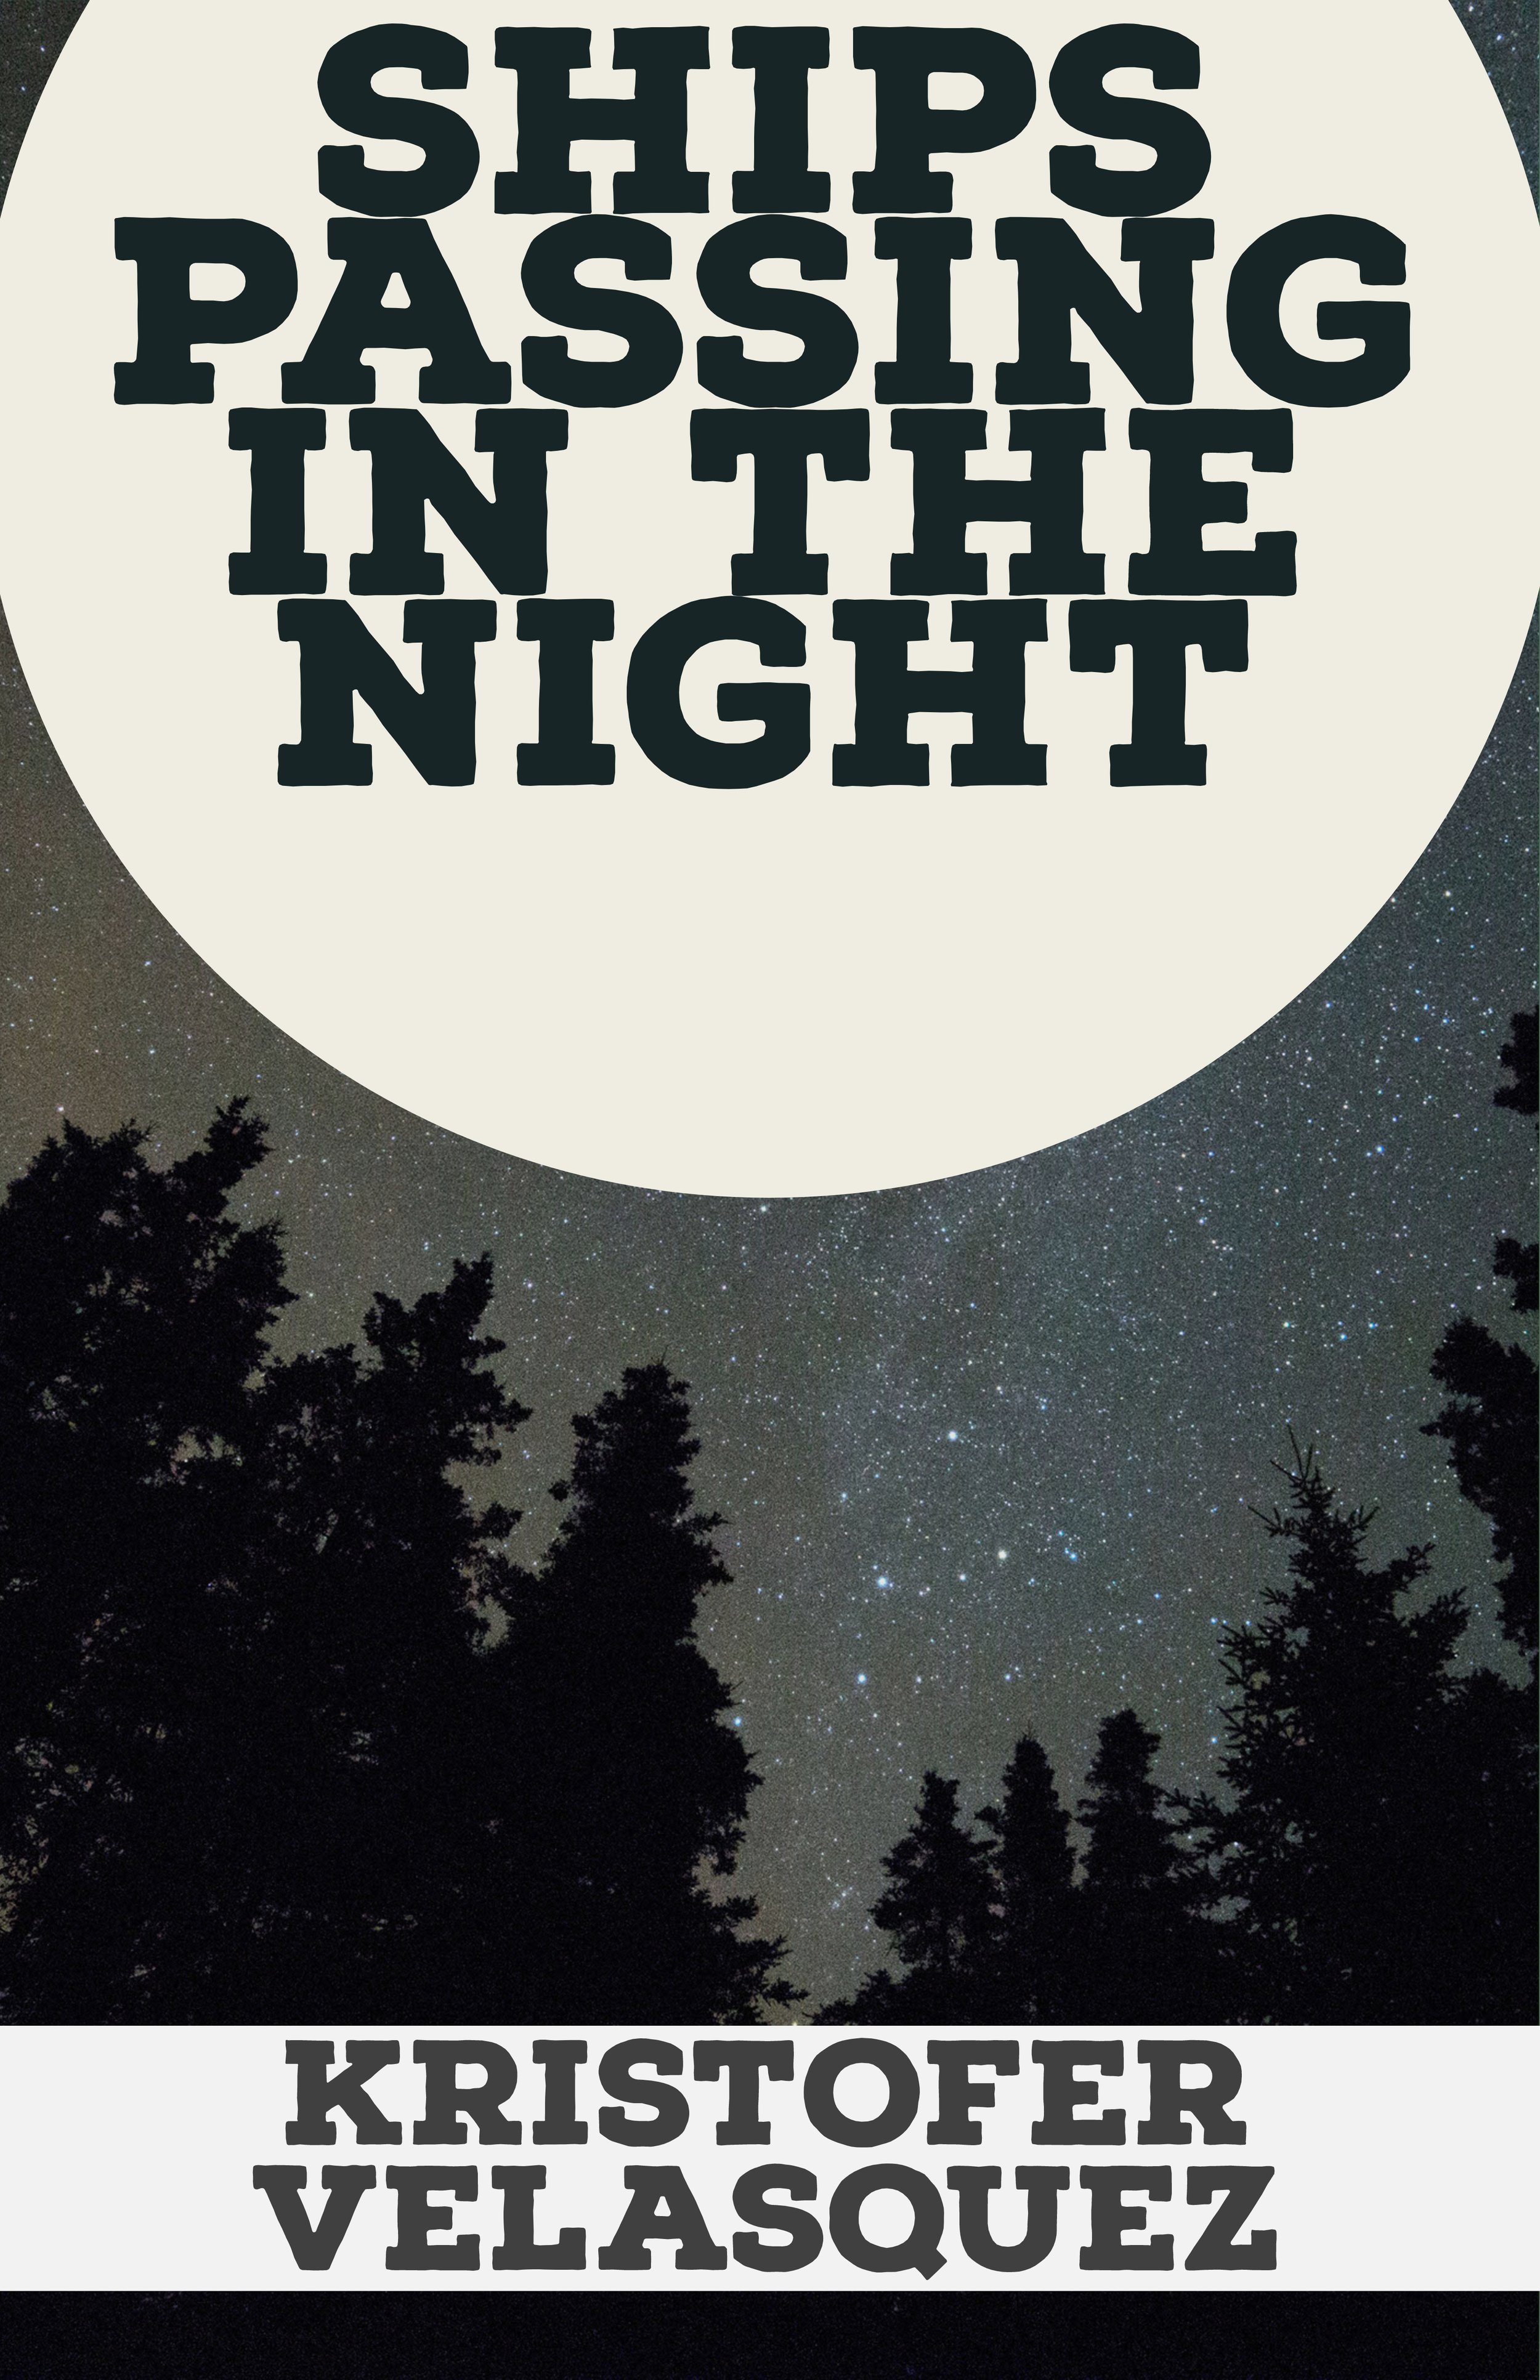  In the dark hours of Labor Day morning, something is happening in the forests off of the desolate Ortega Highway. Kipp has been camping for the weekend and starts off his last day trying to figure out what is causing this bizarre and omnipresent sou